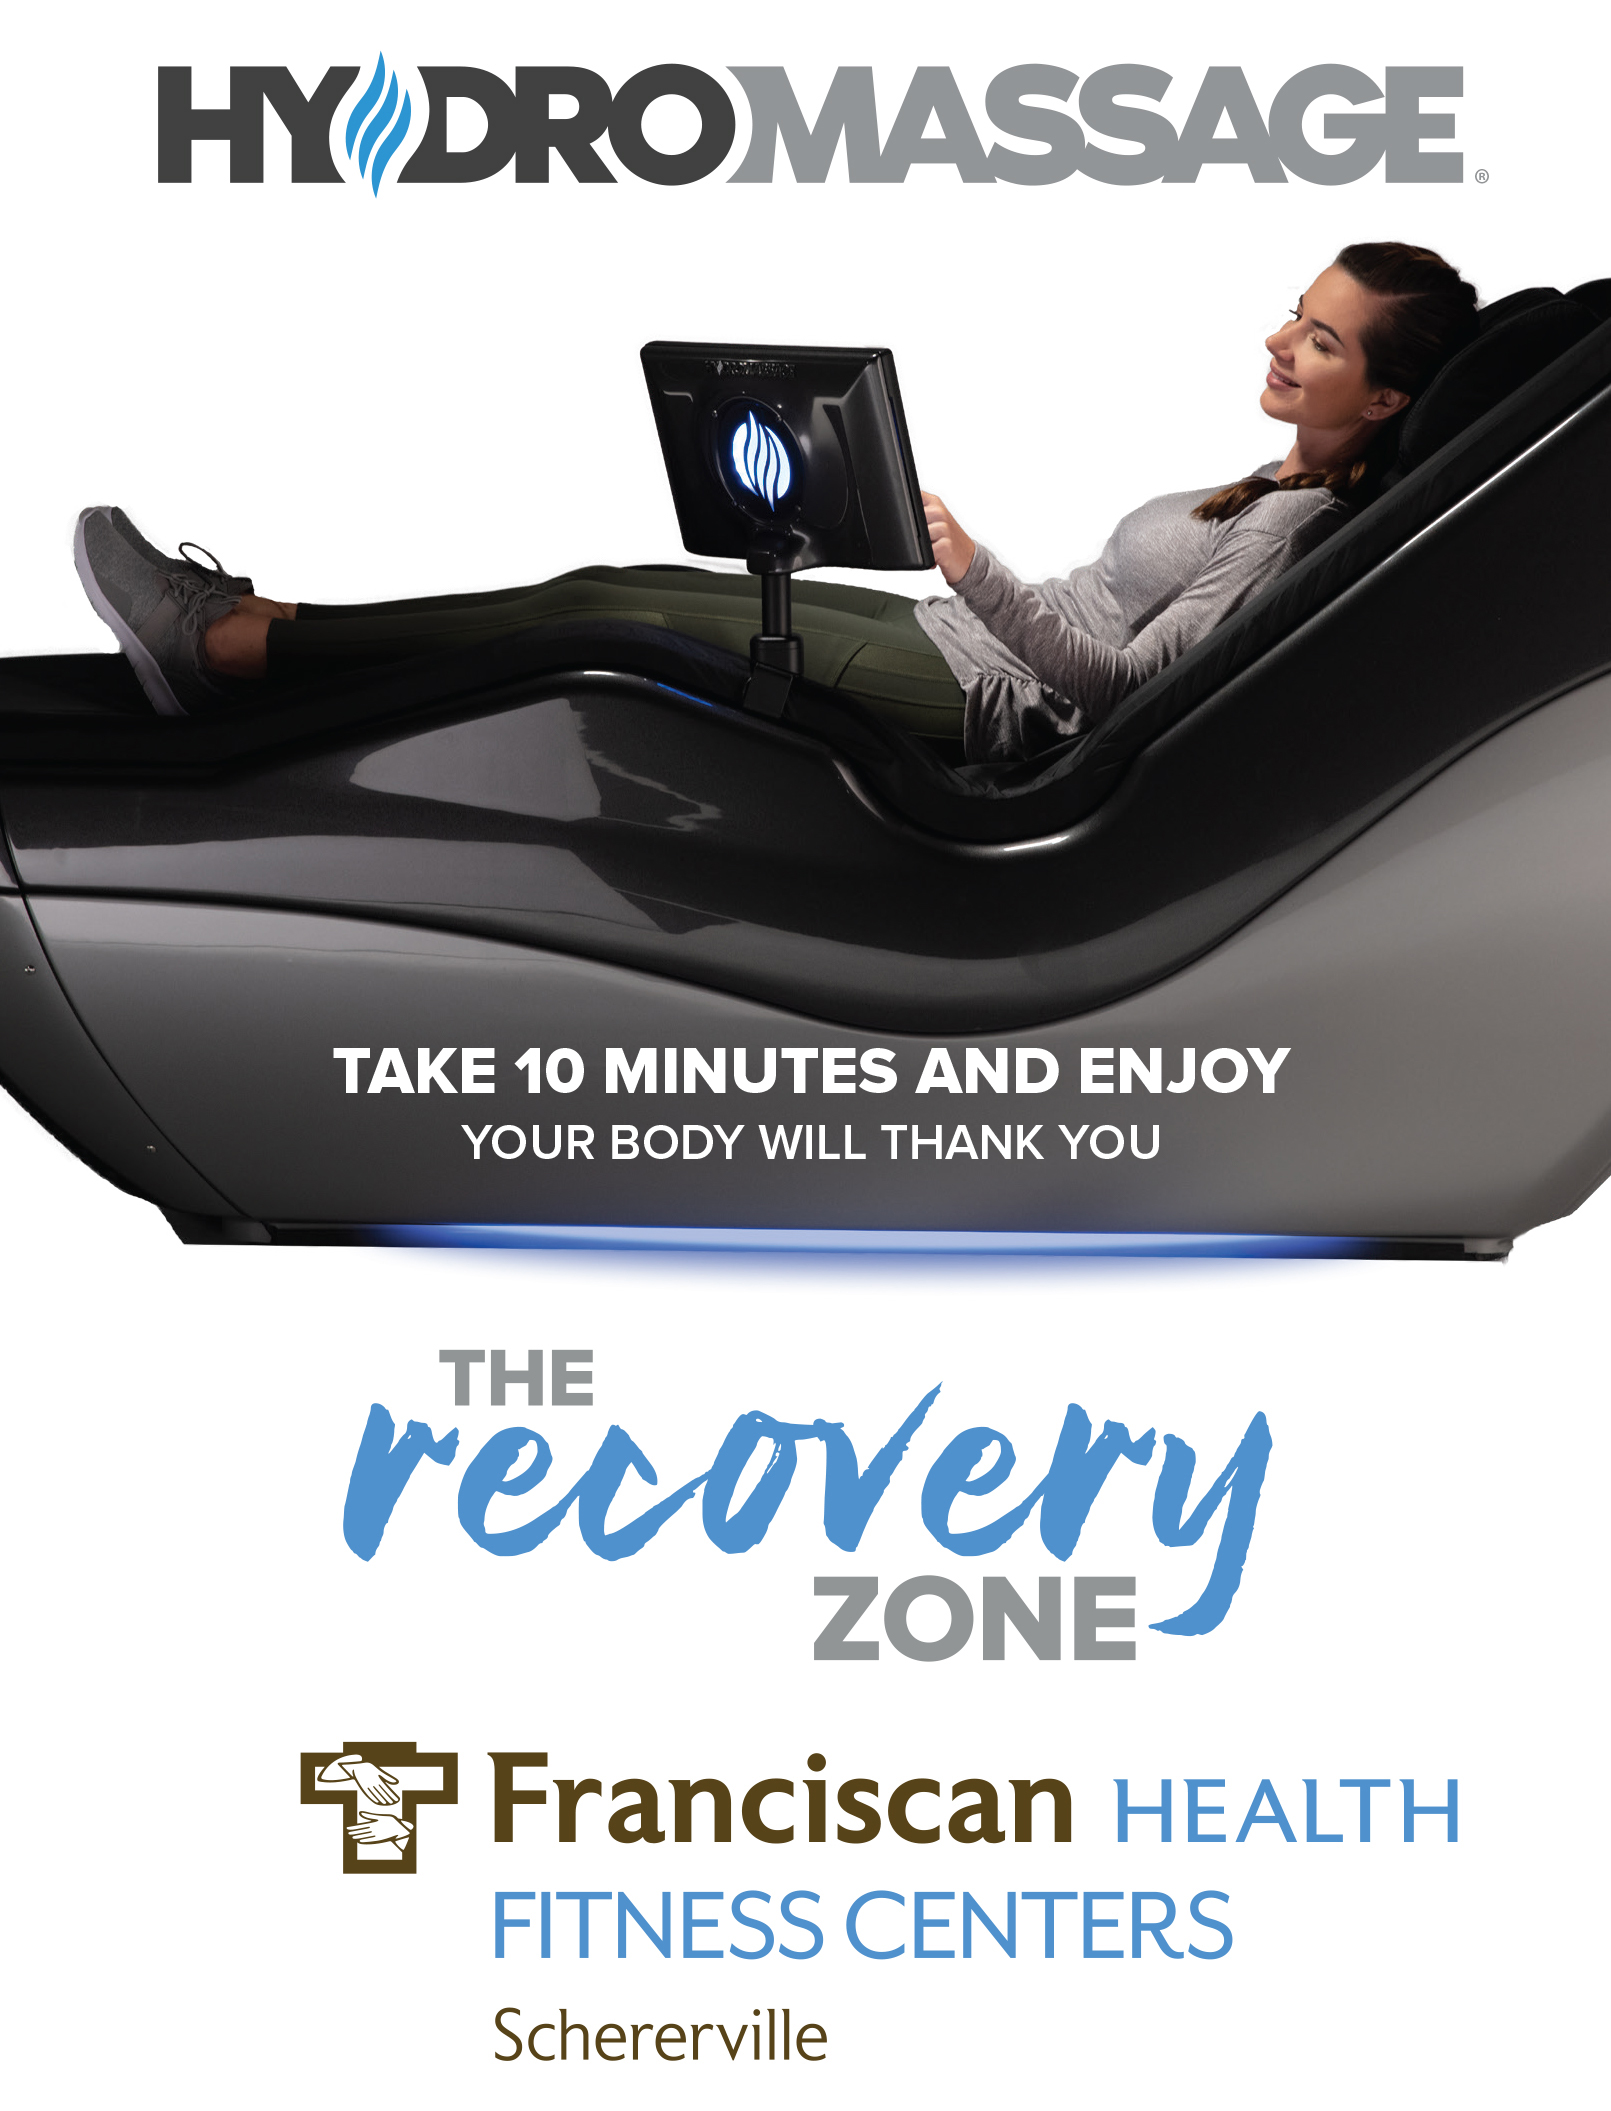 Experience Hydromassage® Franciscan Health Fitness Centers